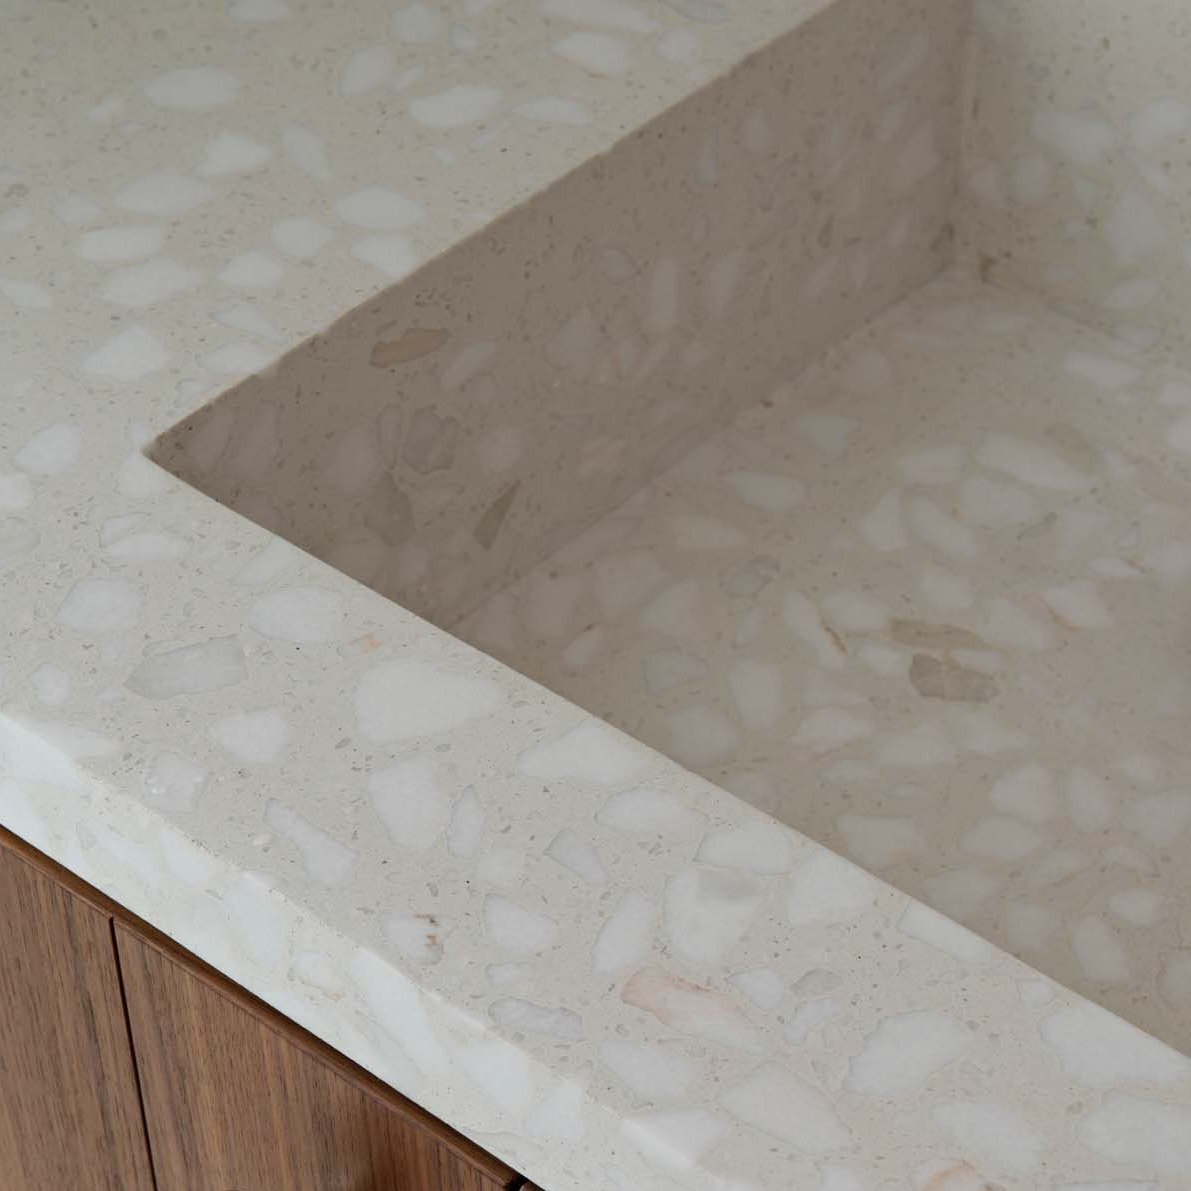 TERRAZZO. Adding lots of texture to the spa in a recently completed residential project. Throughout the house, floor to ceiling Terra di Pietra was paired with stone-washed and sawn oak, an incredible grey marble and river stones.

#spaofdreams #terr